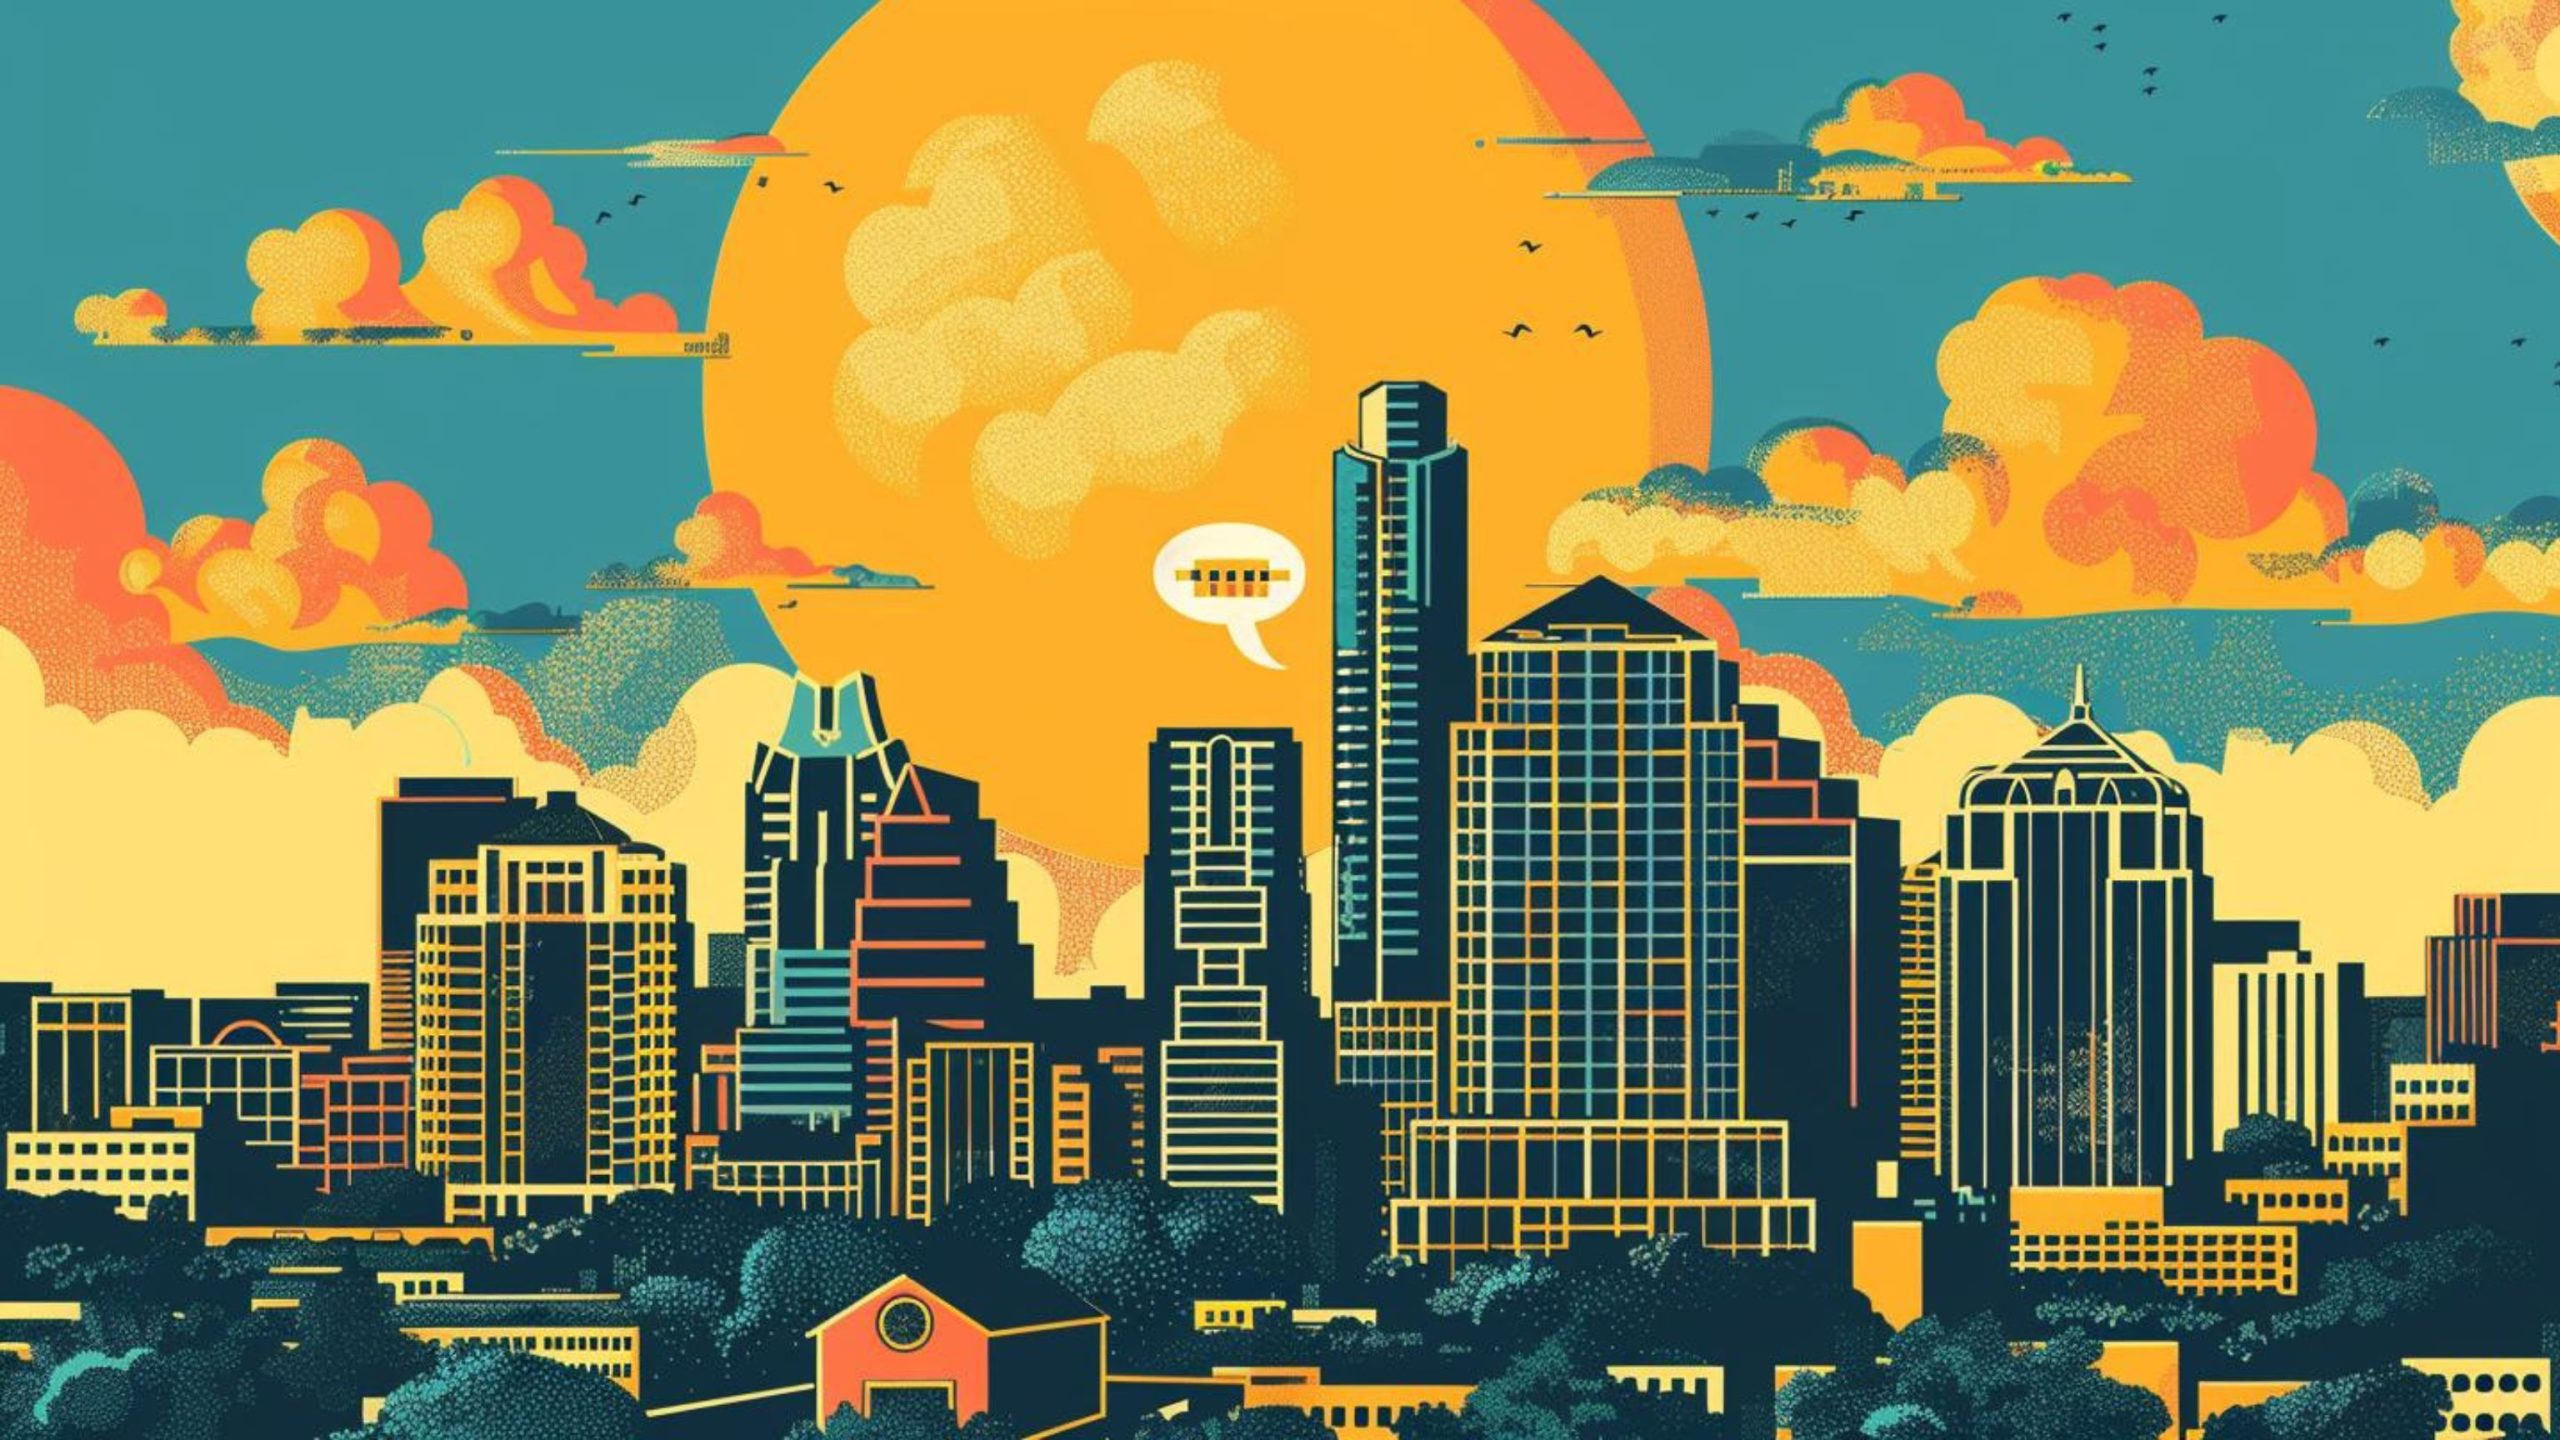 SXSW Is Accused of Using Copyright and Trademark Claims To Suppress Criticism